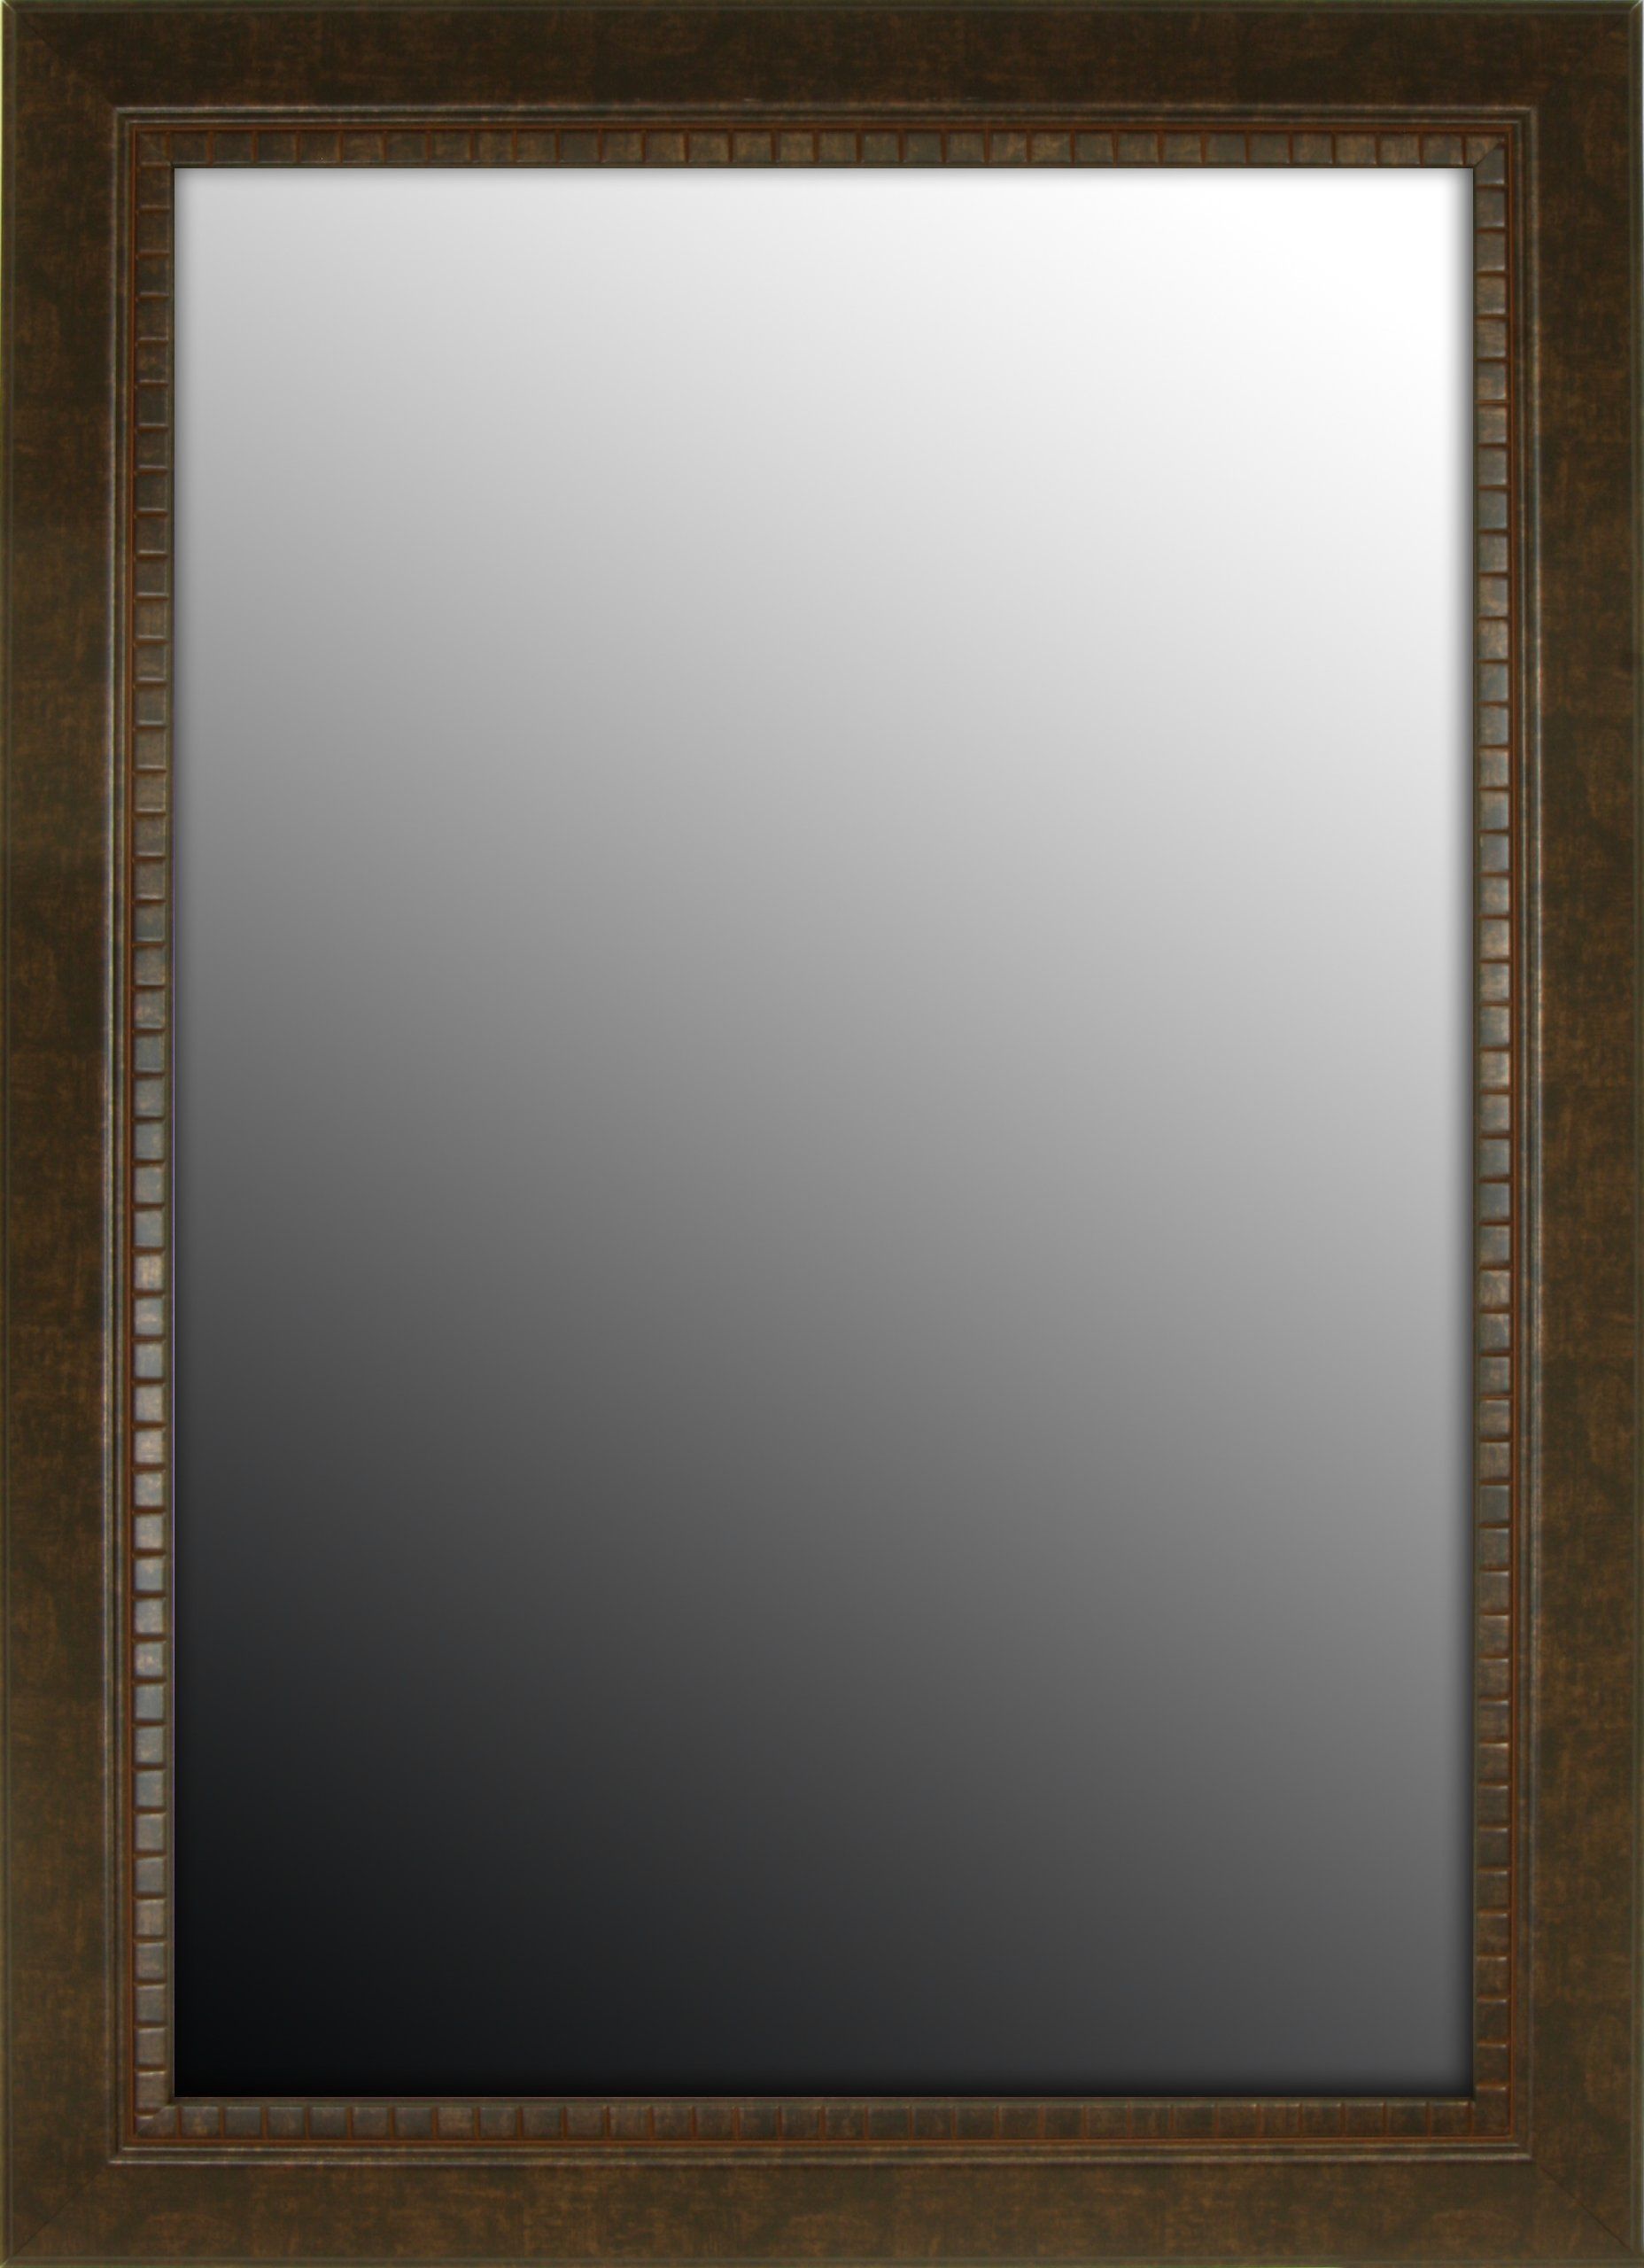 Apple Valley Tuscan Copper Bronze Petite Framed Wall Mirror, 27 Inch Throughout Woven Bronze Metal Wall Mirrors (View 13 of 15)